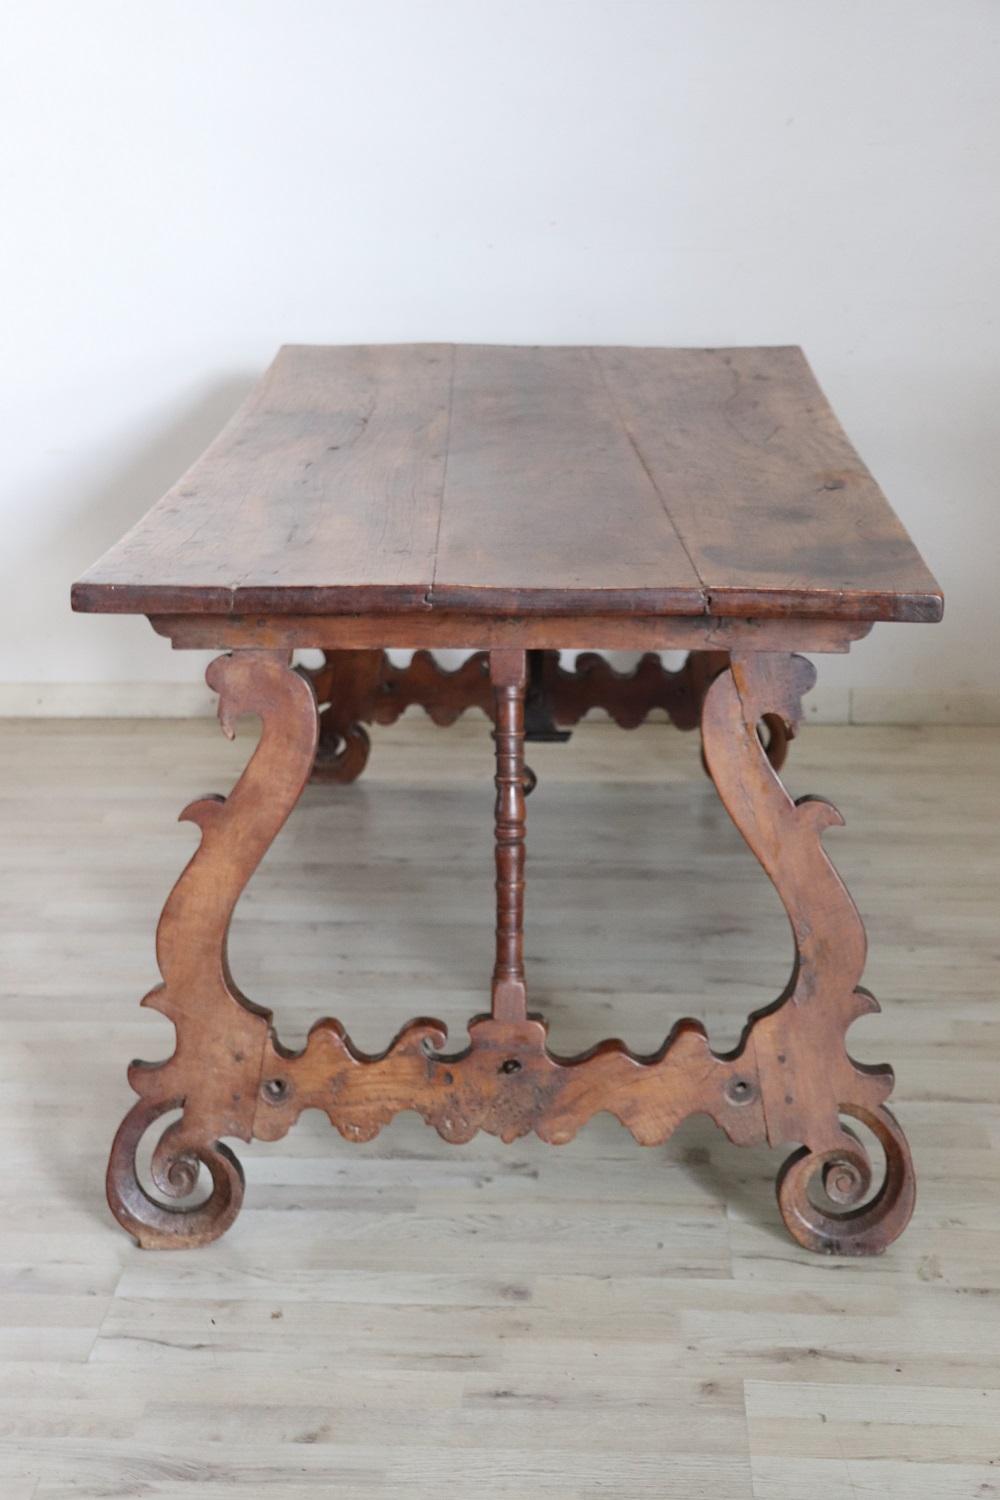 Important antique solid cherry wood fratino table from the early 17th century. Cherry wood has acquired a beautiful antique patina presenting the signs of all the past centuries. This type of table in Italy was called 